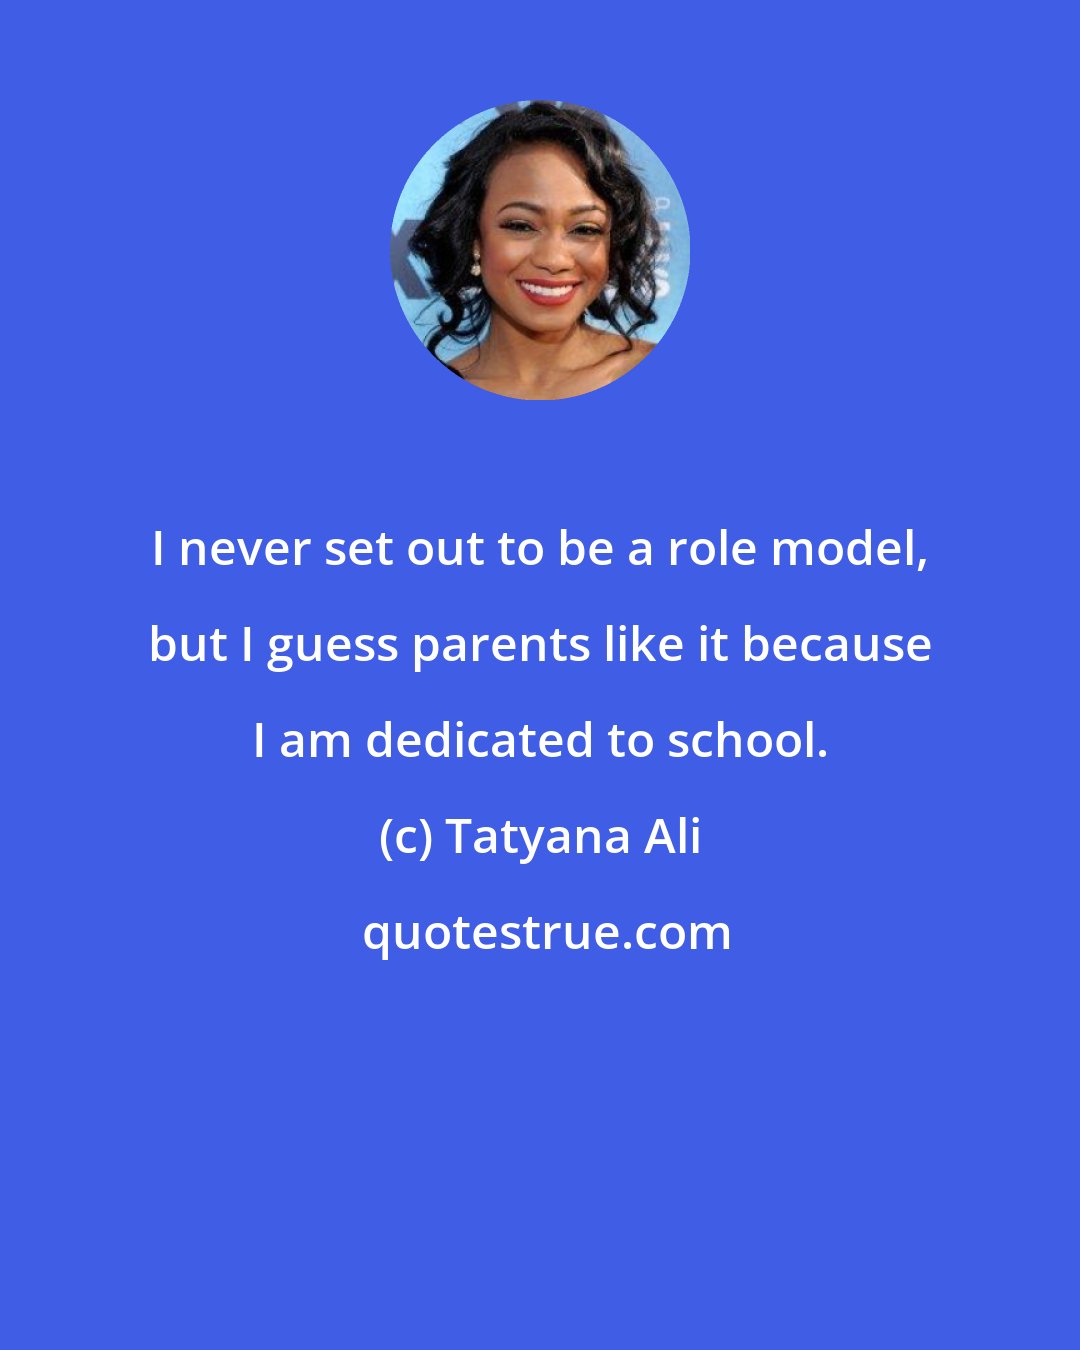 Tatyana Ali: I never set out to be a role model, but I guess parents like it because I am dedicated to school.